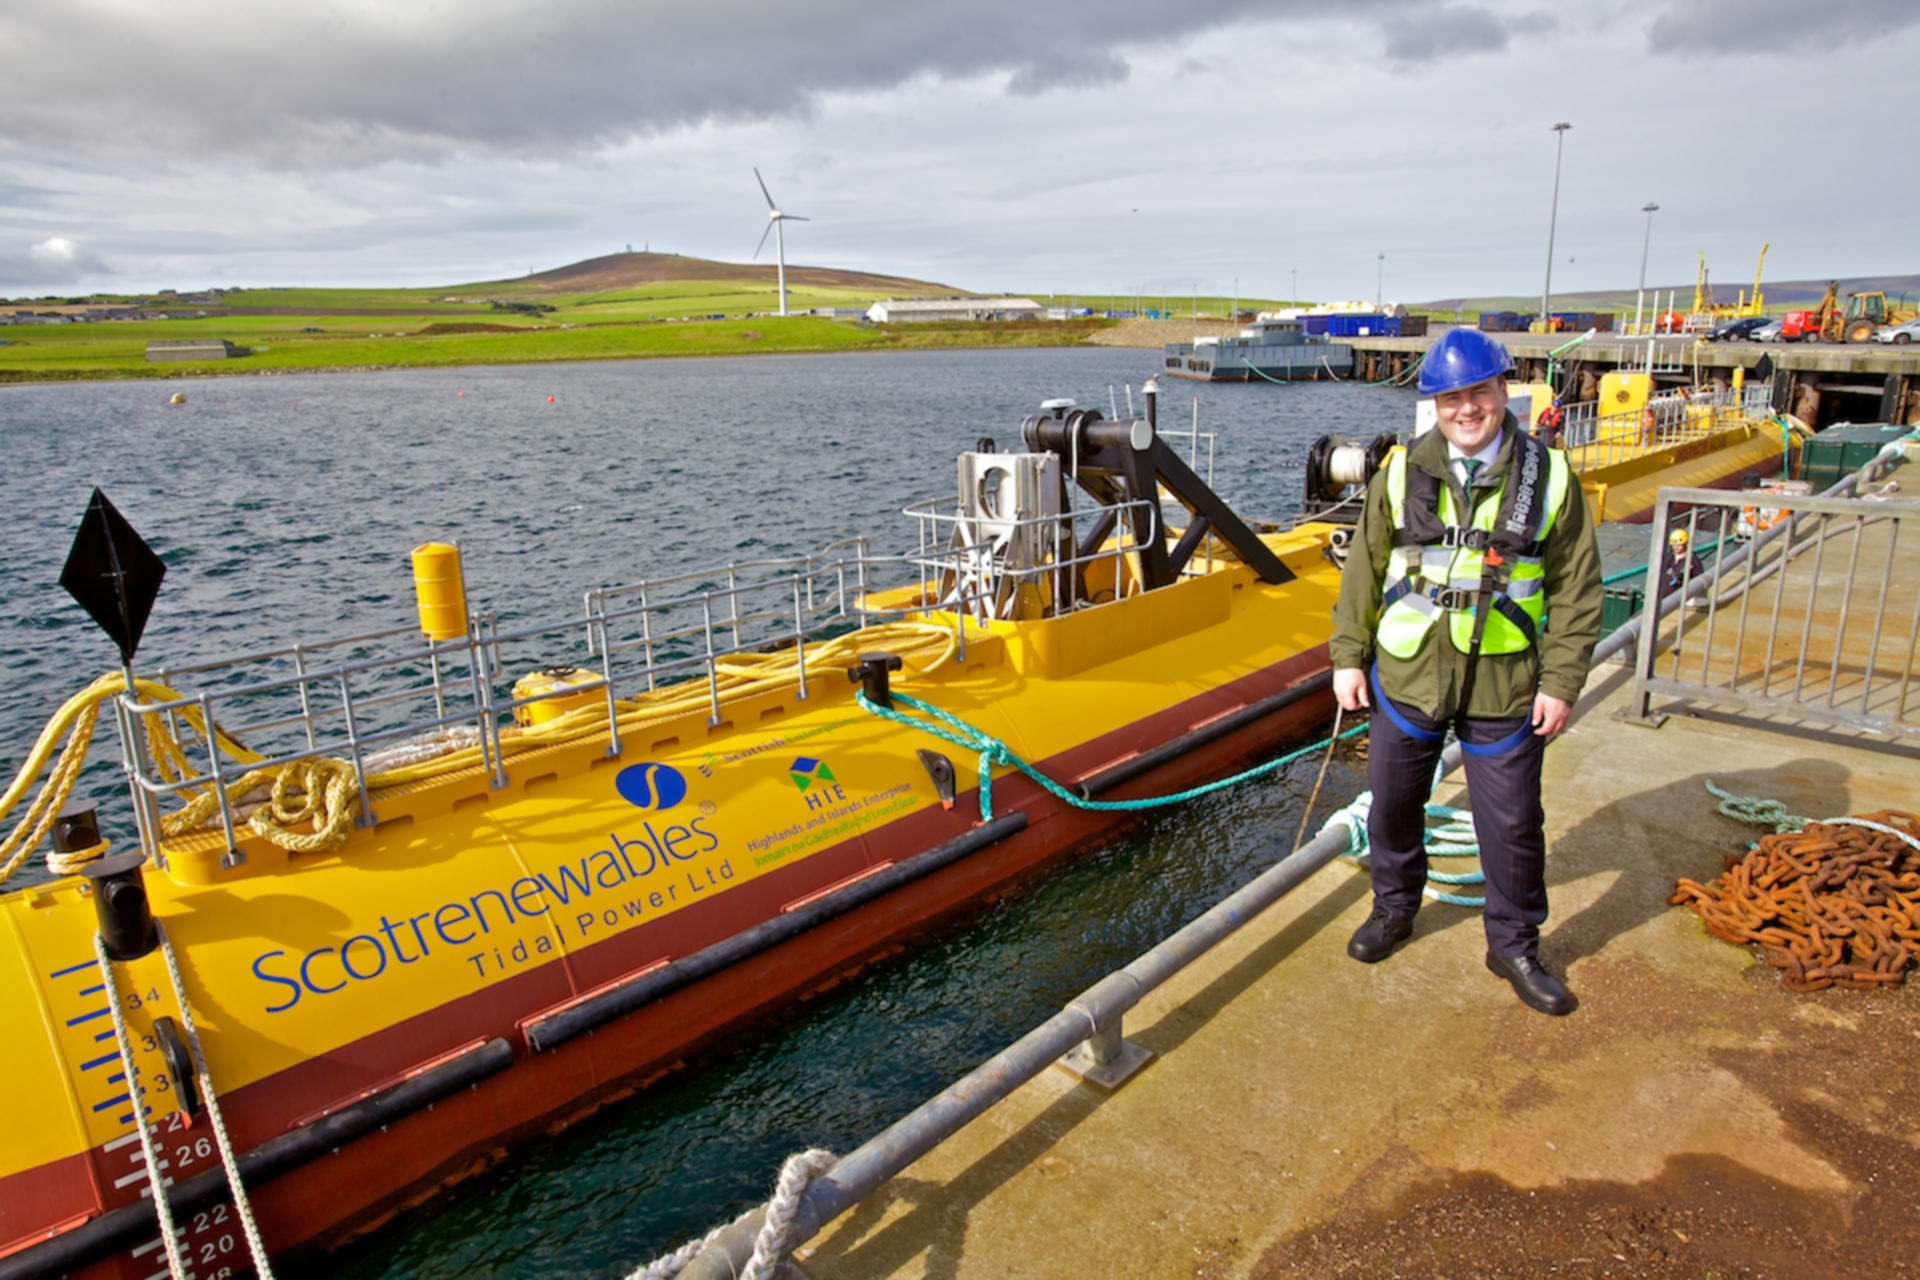 Paul Wheelhouse at the Orkney tidal power launch site.